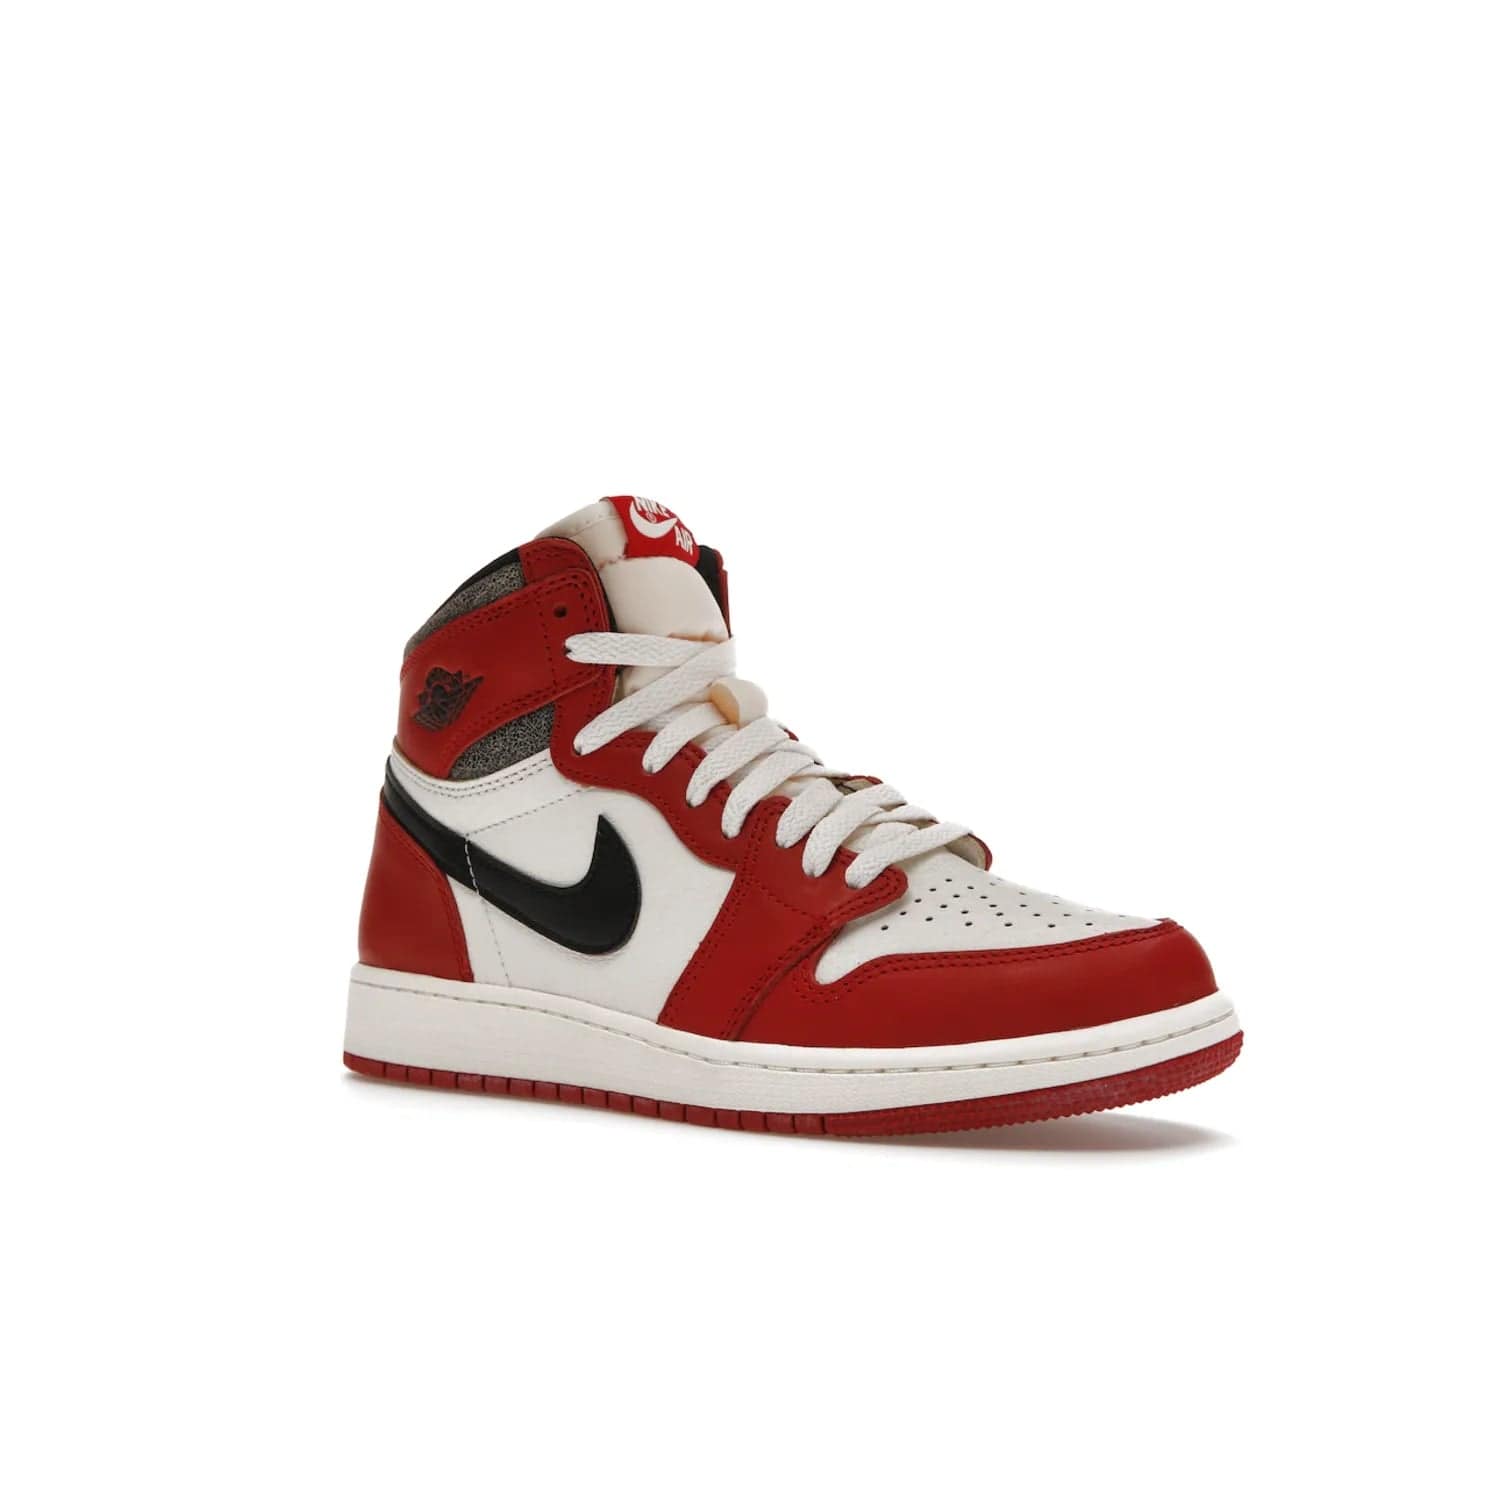 Jordan 1 Retro High OG Chicago Lost and Found (GS) - Image 5 - Only at www.BallersClubKickz.com - Grab the Air Jordan 1 Retro High OG Chicago Reimagined GS, presenting in classic 1985 silhouette. Varsity Red, Black, Muslin and Sail hues, featuring Nike Air branding, Wings on the collars and printed insoles. Don't miss out when it releases 19th Nov 2022.